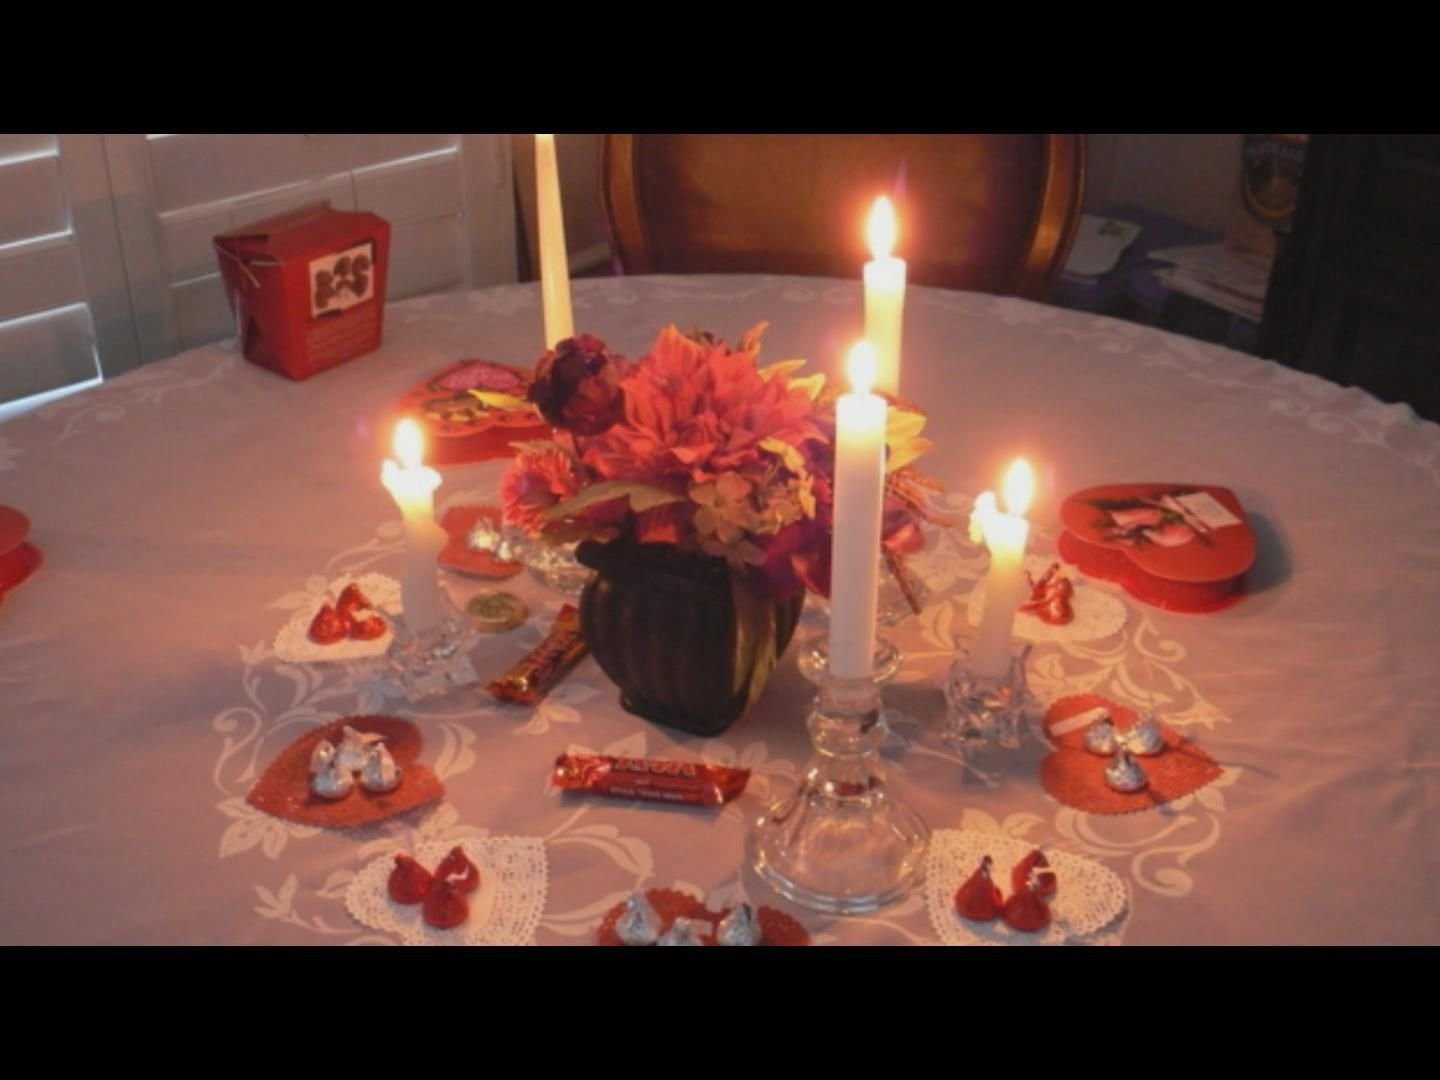 10 Stylish Romantic Ideas To Do At Home romantic valentine dinner ideas at home learn to have more great 4 2022